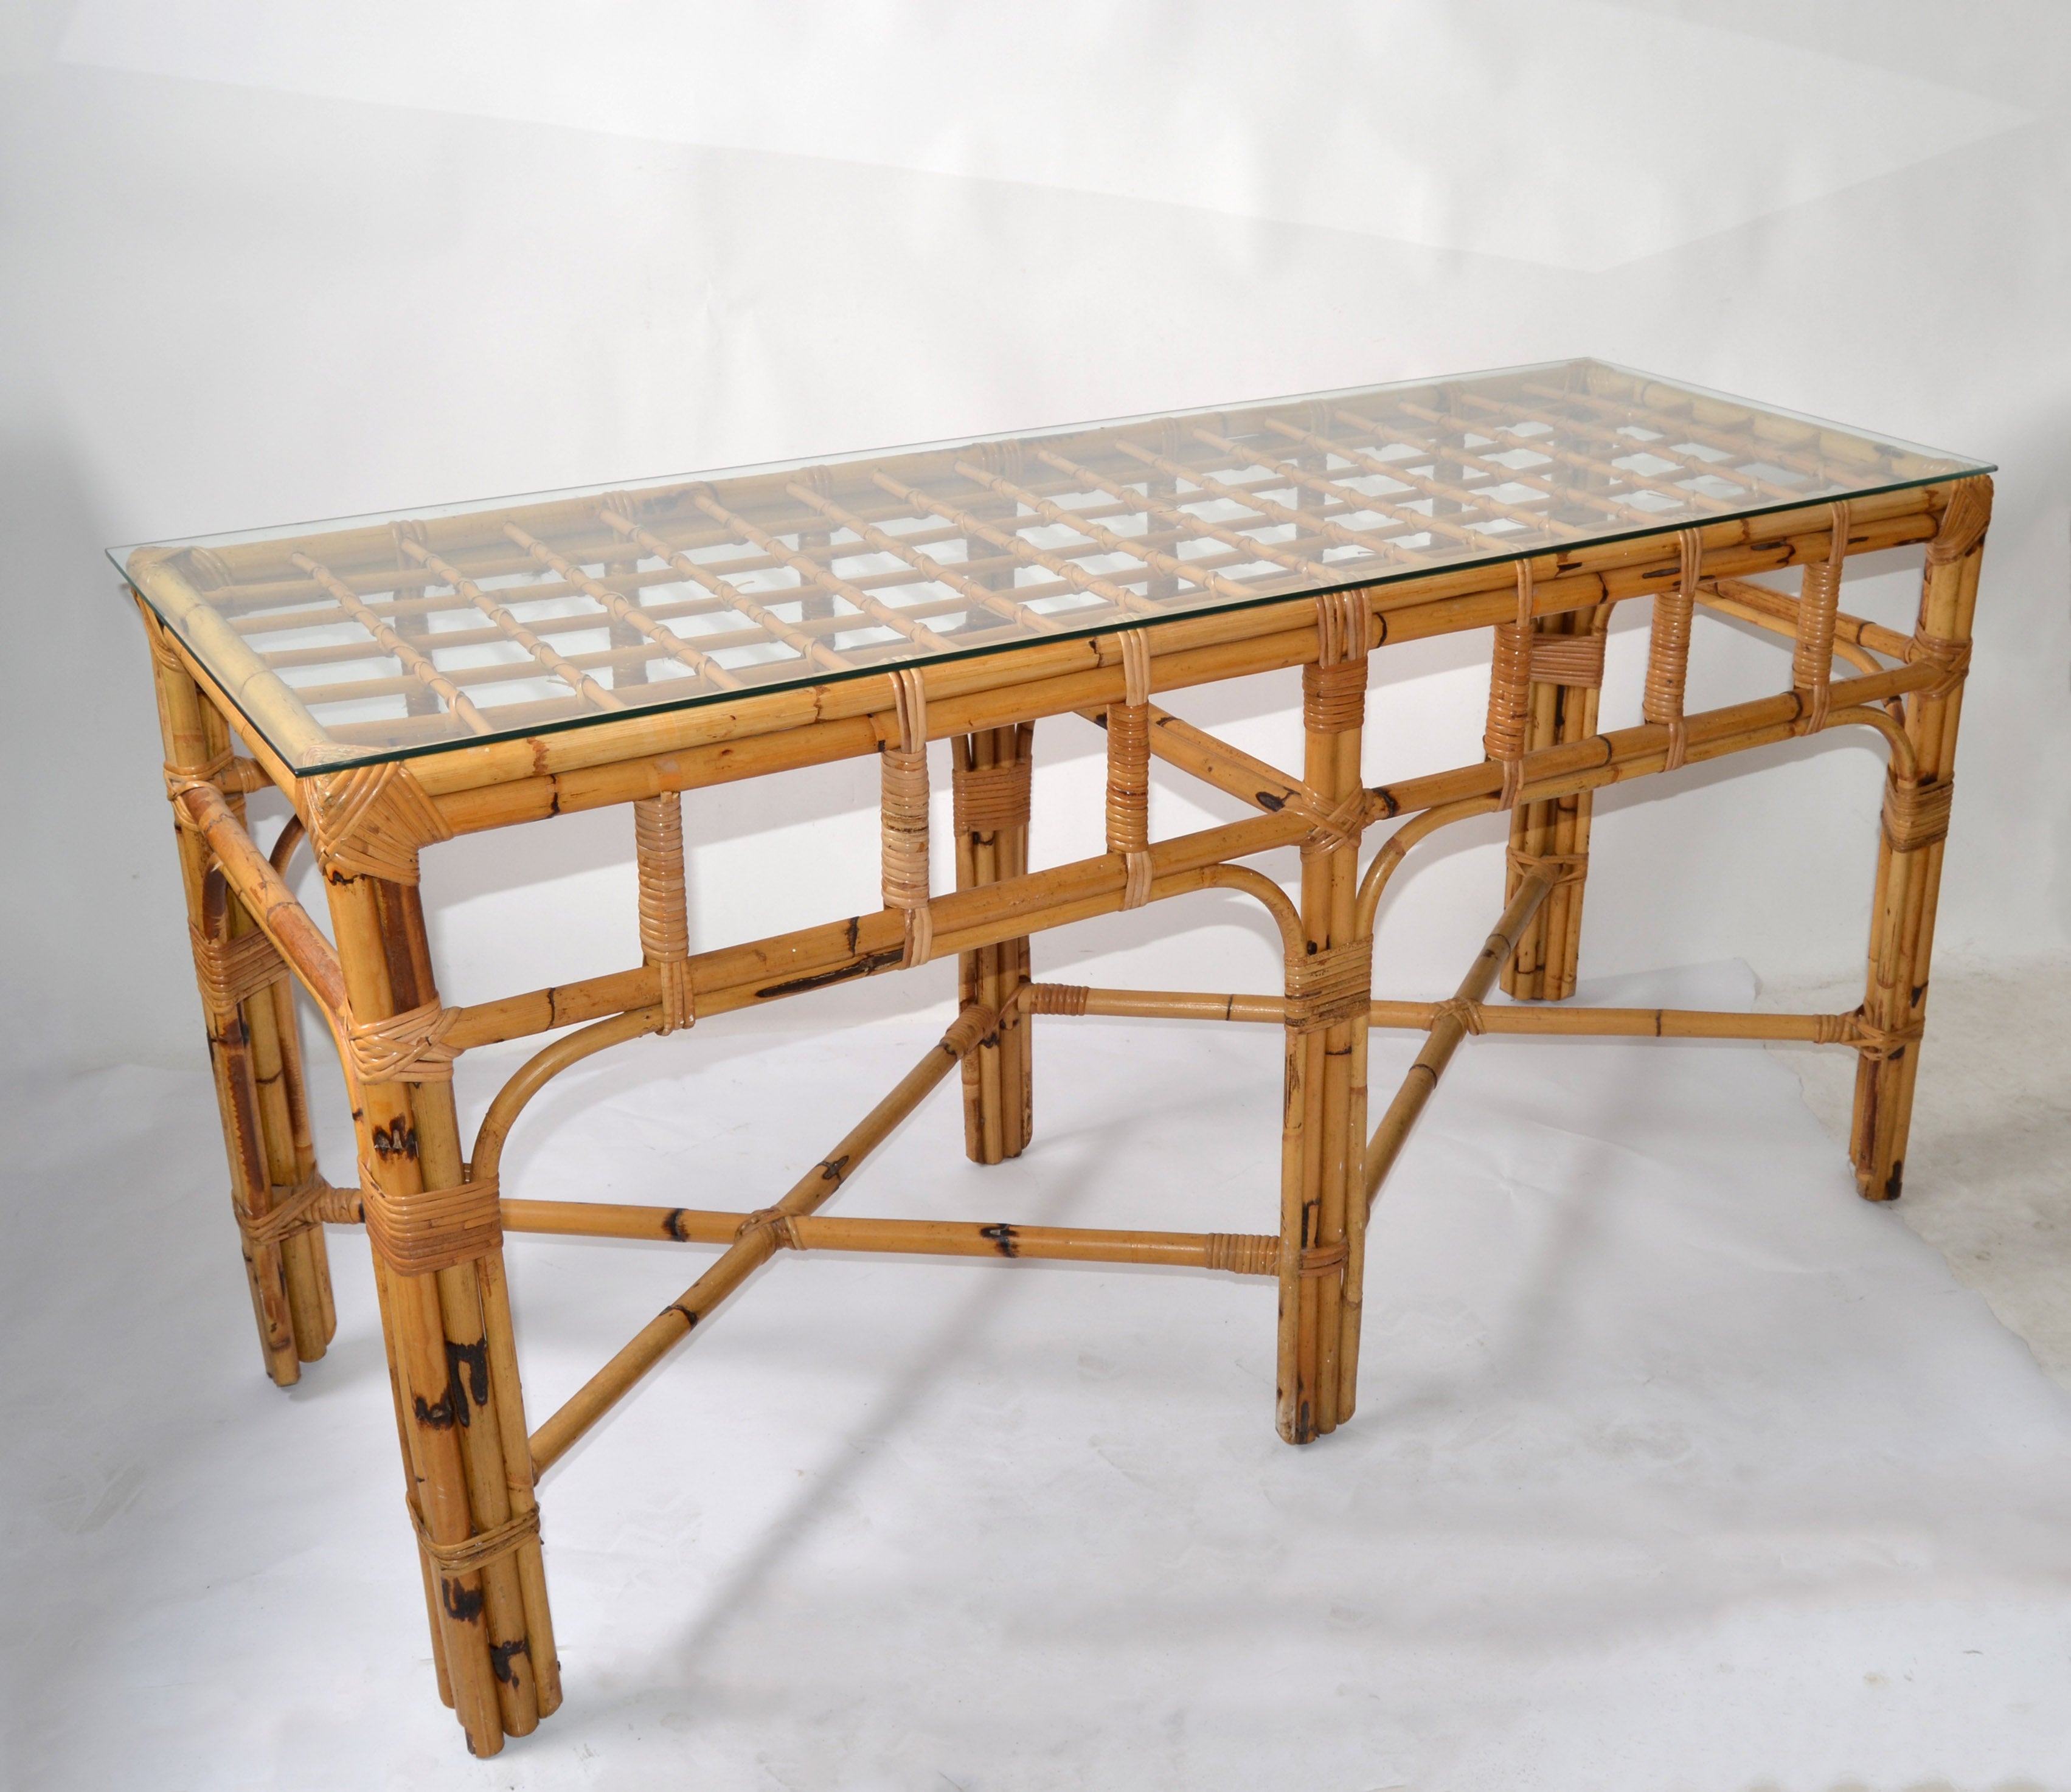 Stunning Boho Chic Mid-Century Modern handcrafted console table or sofa table in bent bamboo and rattan bindings.
Unique six bamboo legs and detailed handwoven corners and X Stretchers.
Comes with a glass top.
Console measures without the Glass